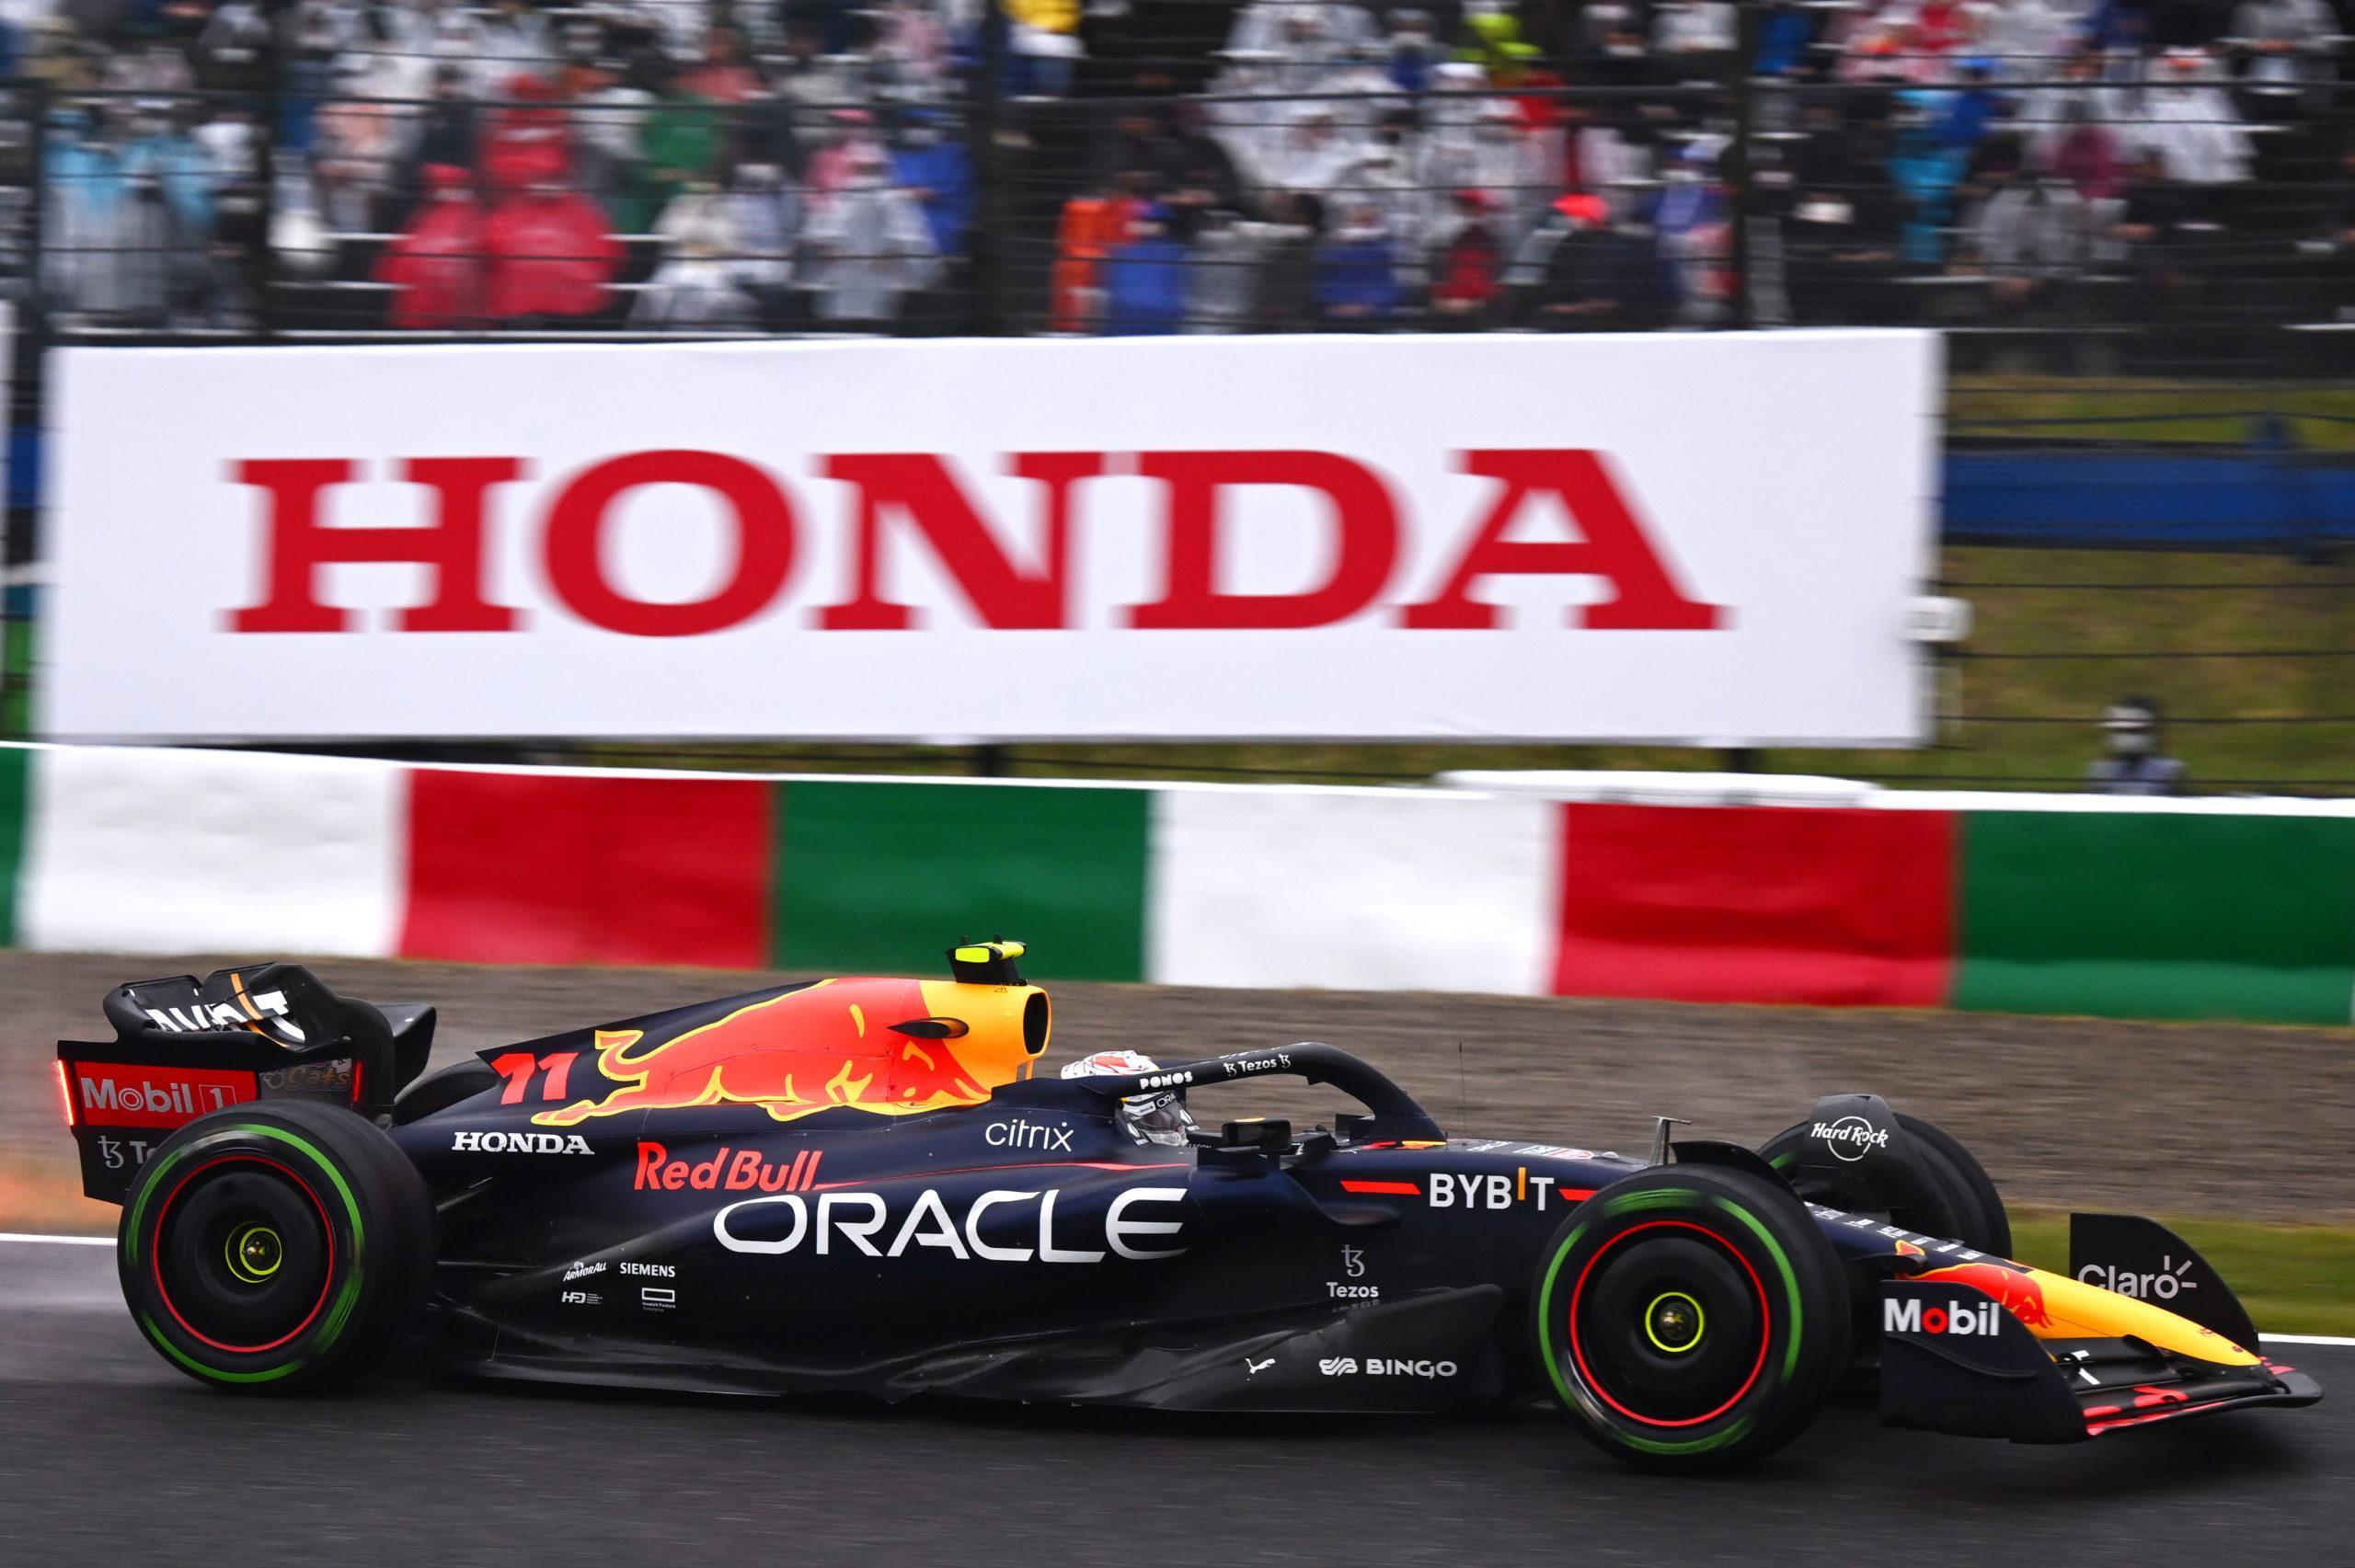 Partnering up with Oracle Red Bull Racing for the Suzuka Grand Prix